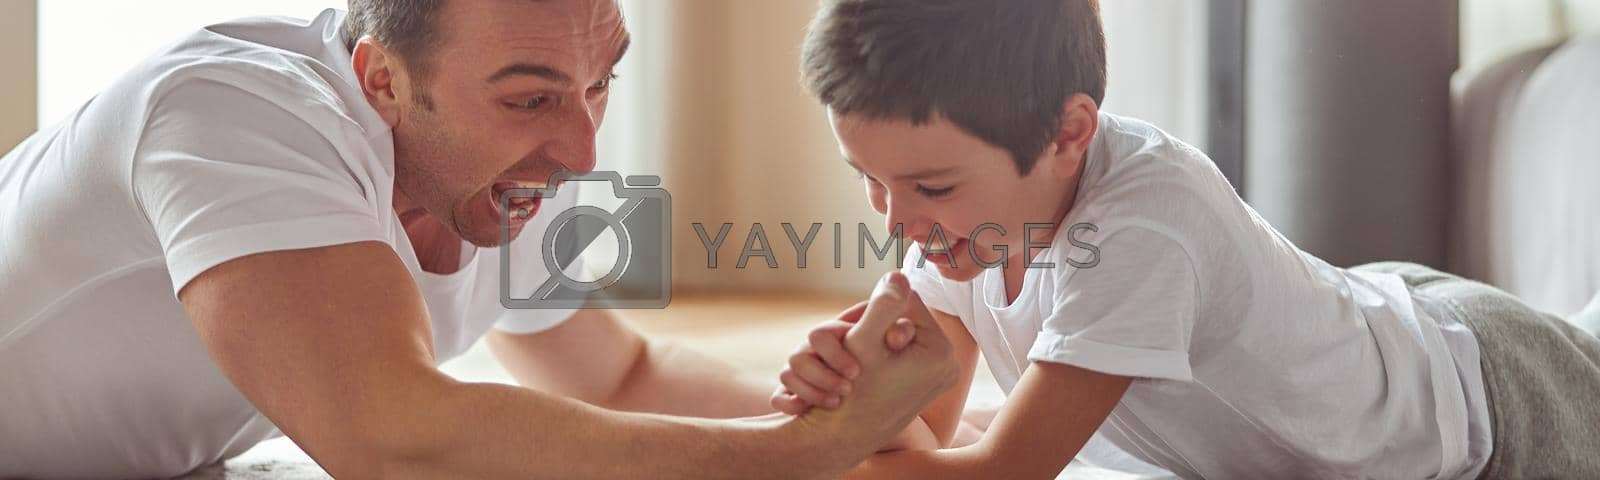 Jolly father is having fun with little boy on floor in living room and doing armwrestling battle